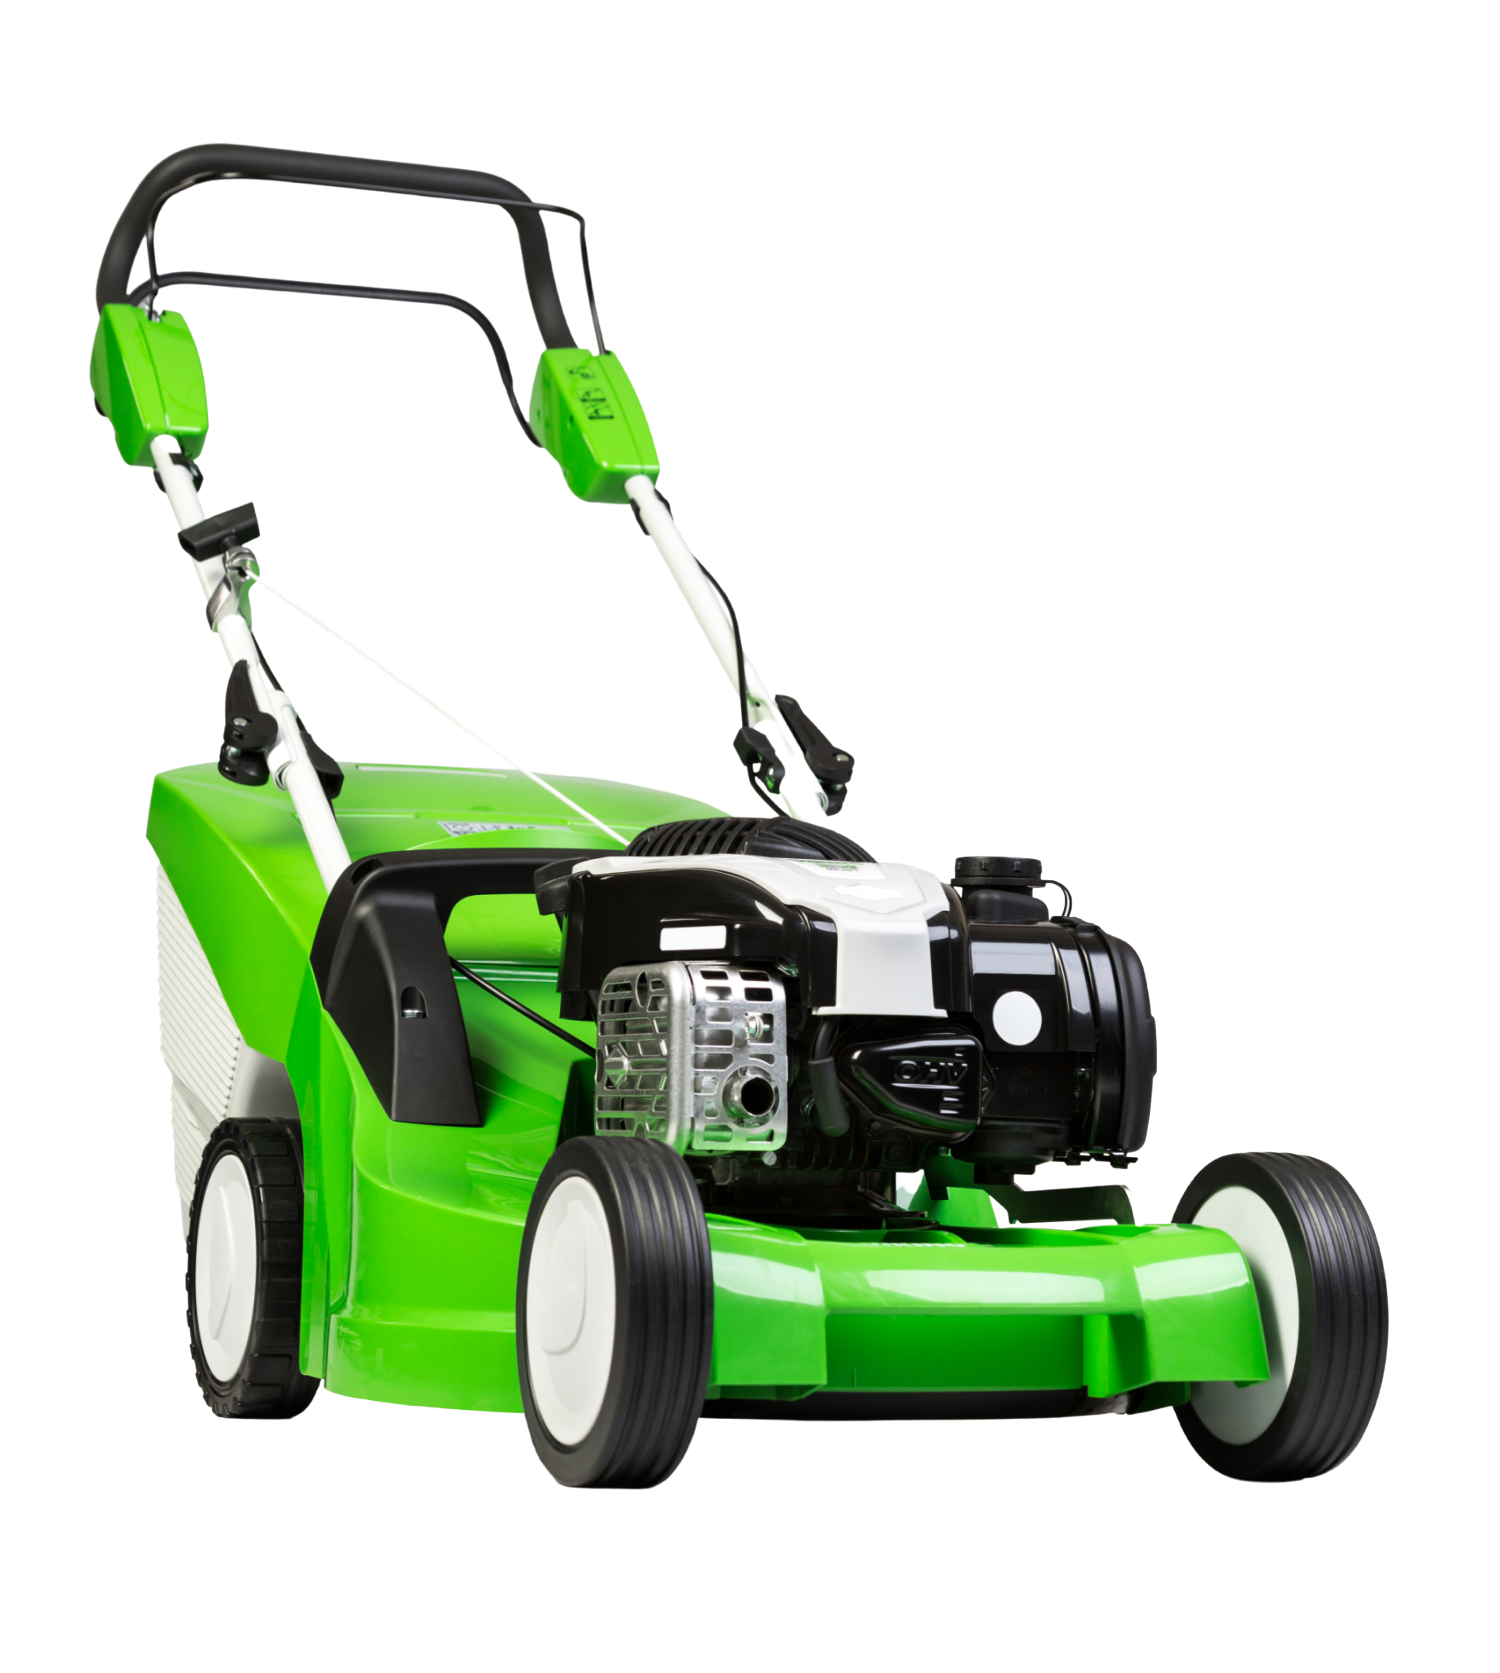 image of lawn mower for Small Engine Warranty